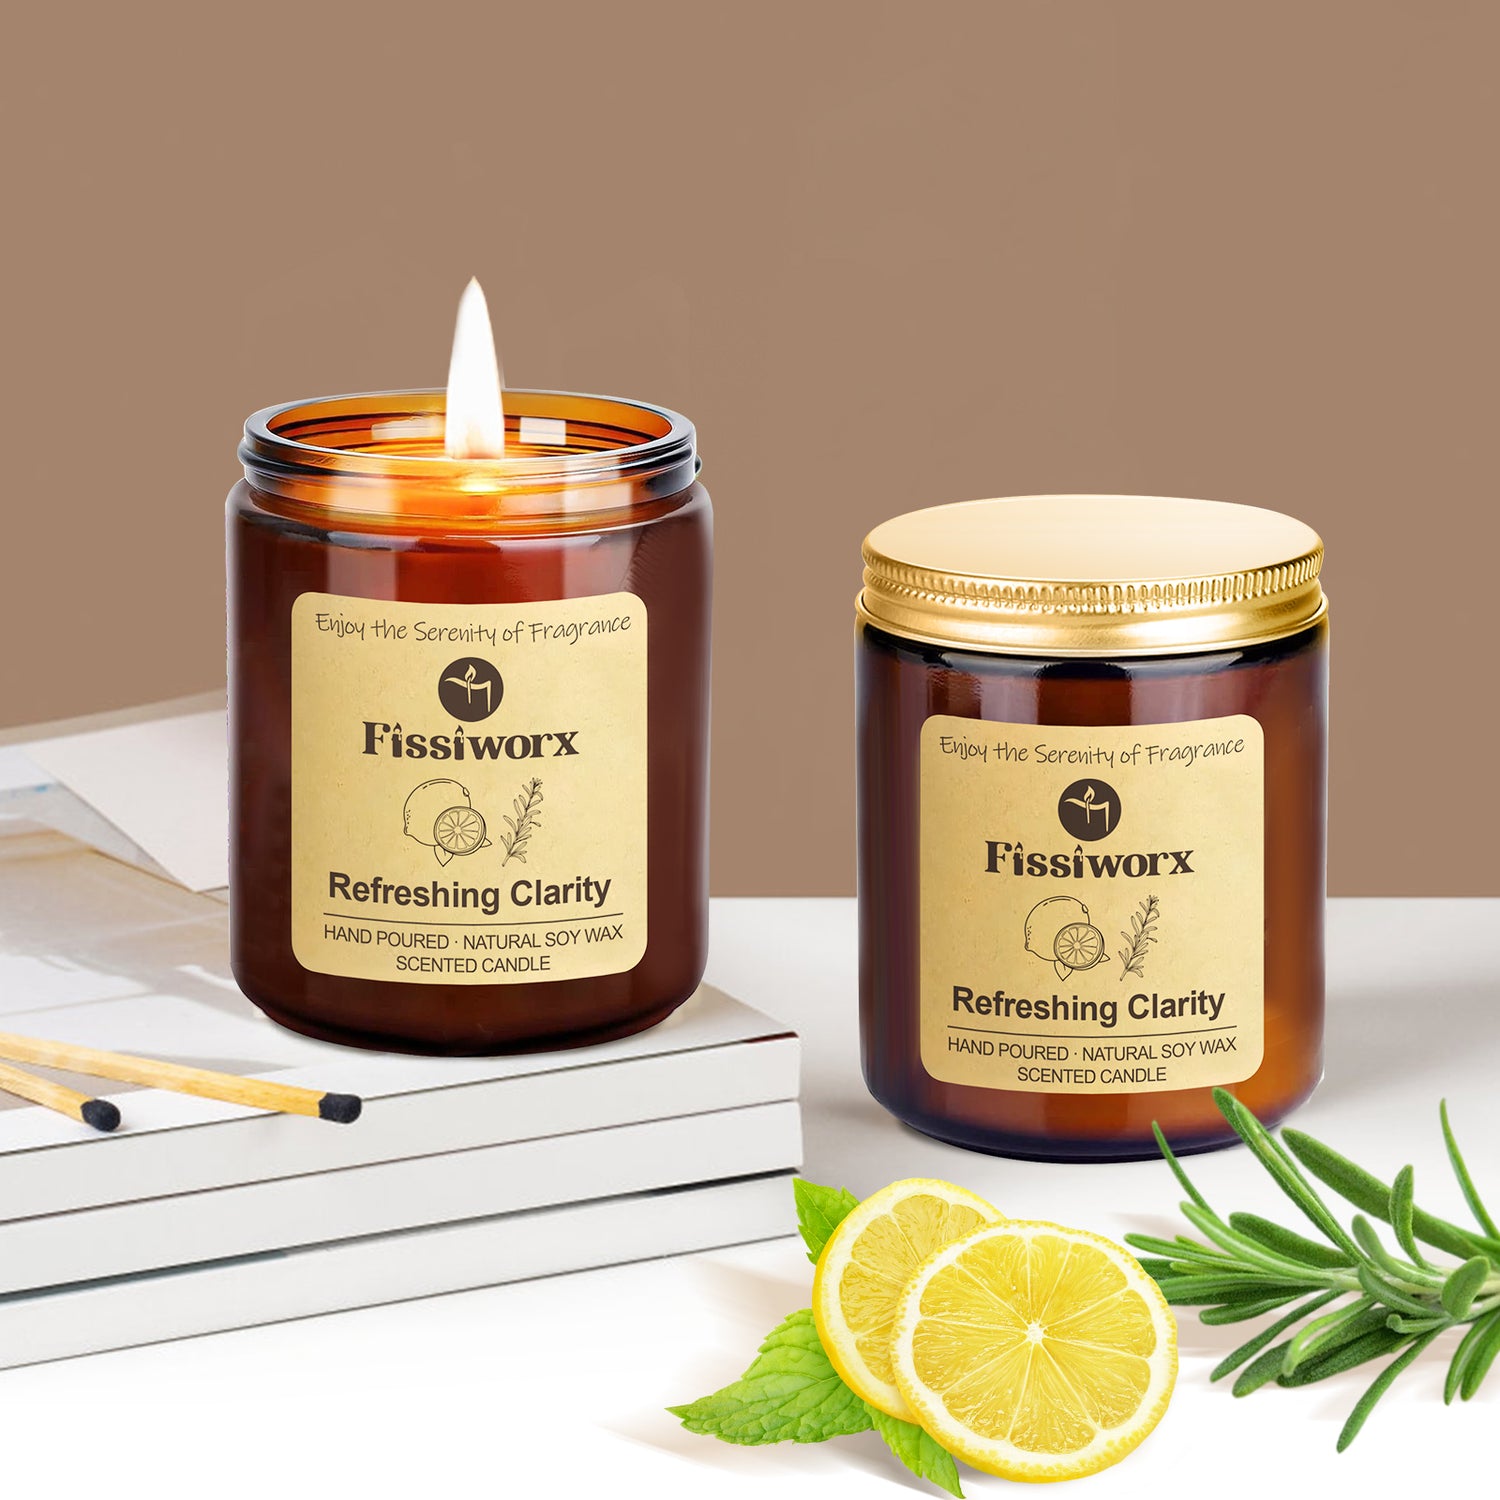 Refreshing Clarity Scented Candle Gold 2pcs - Fissiworx store